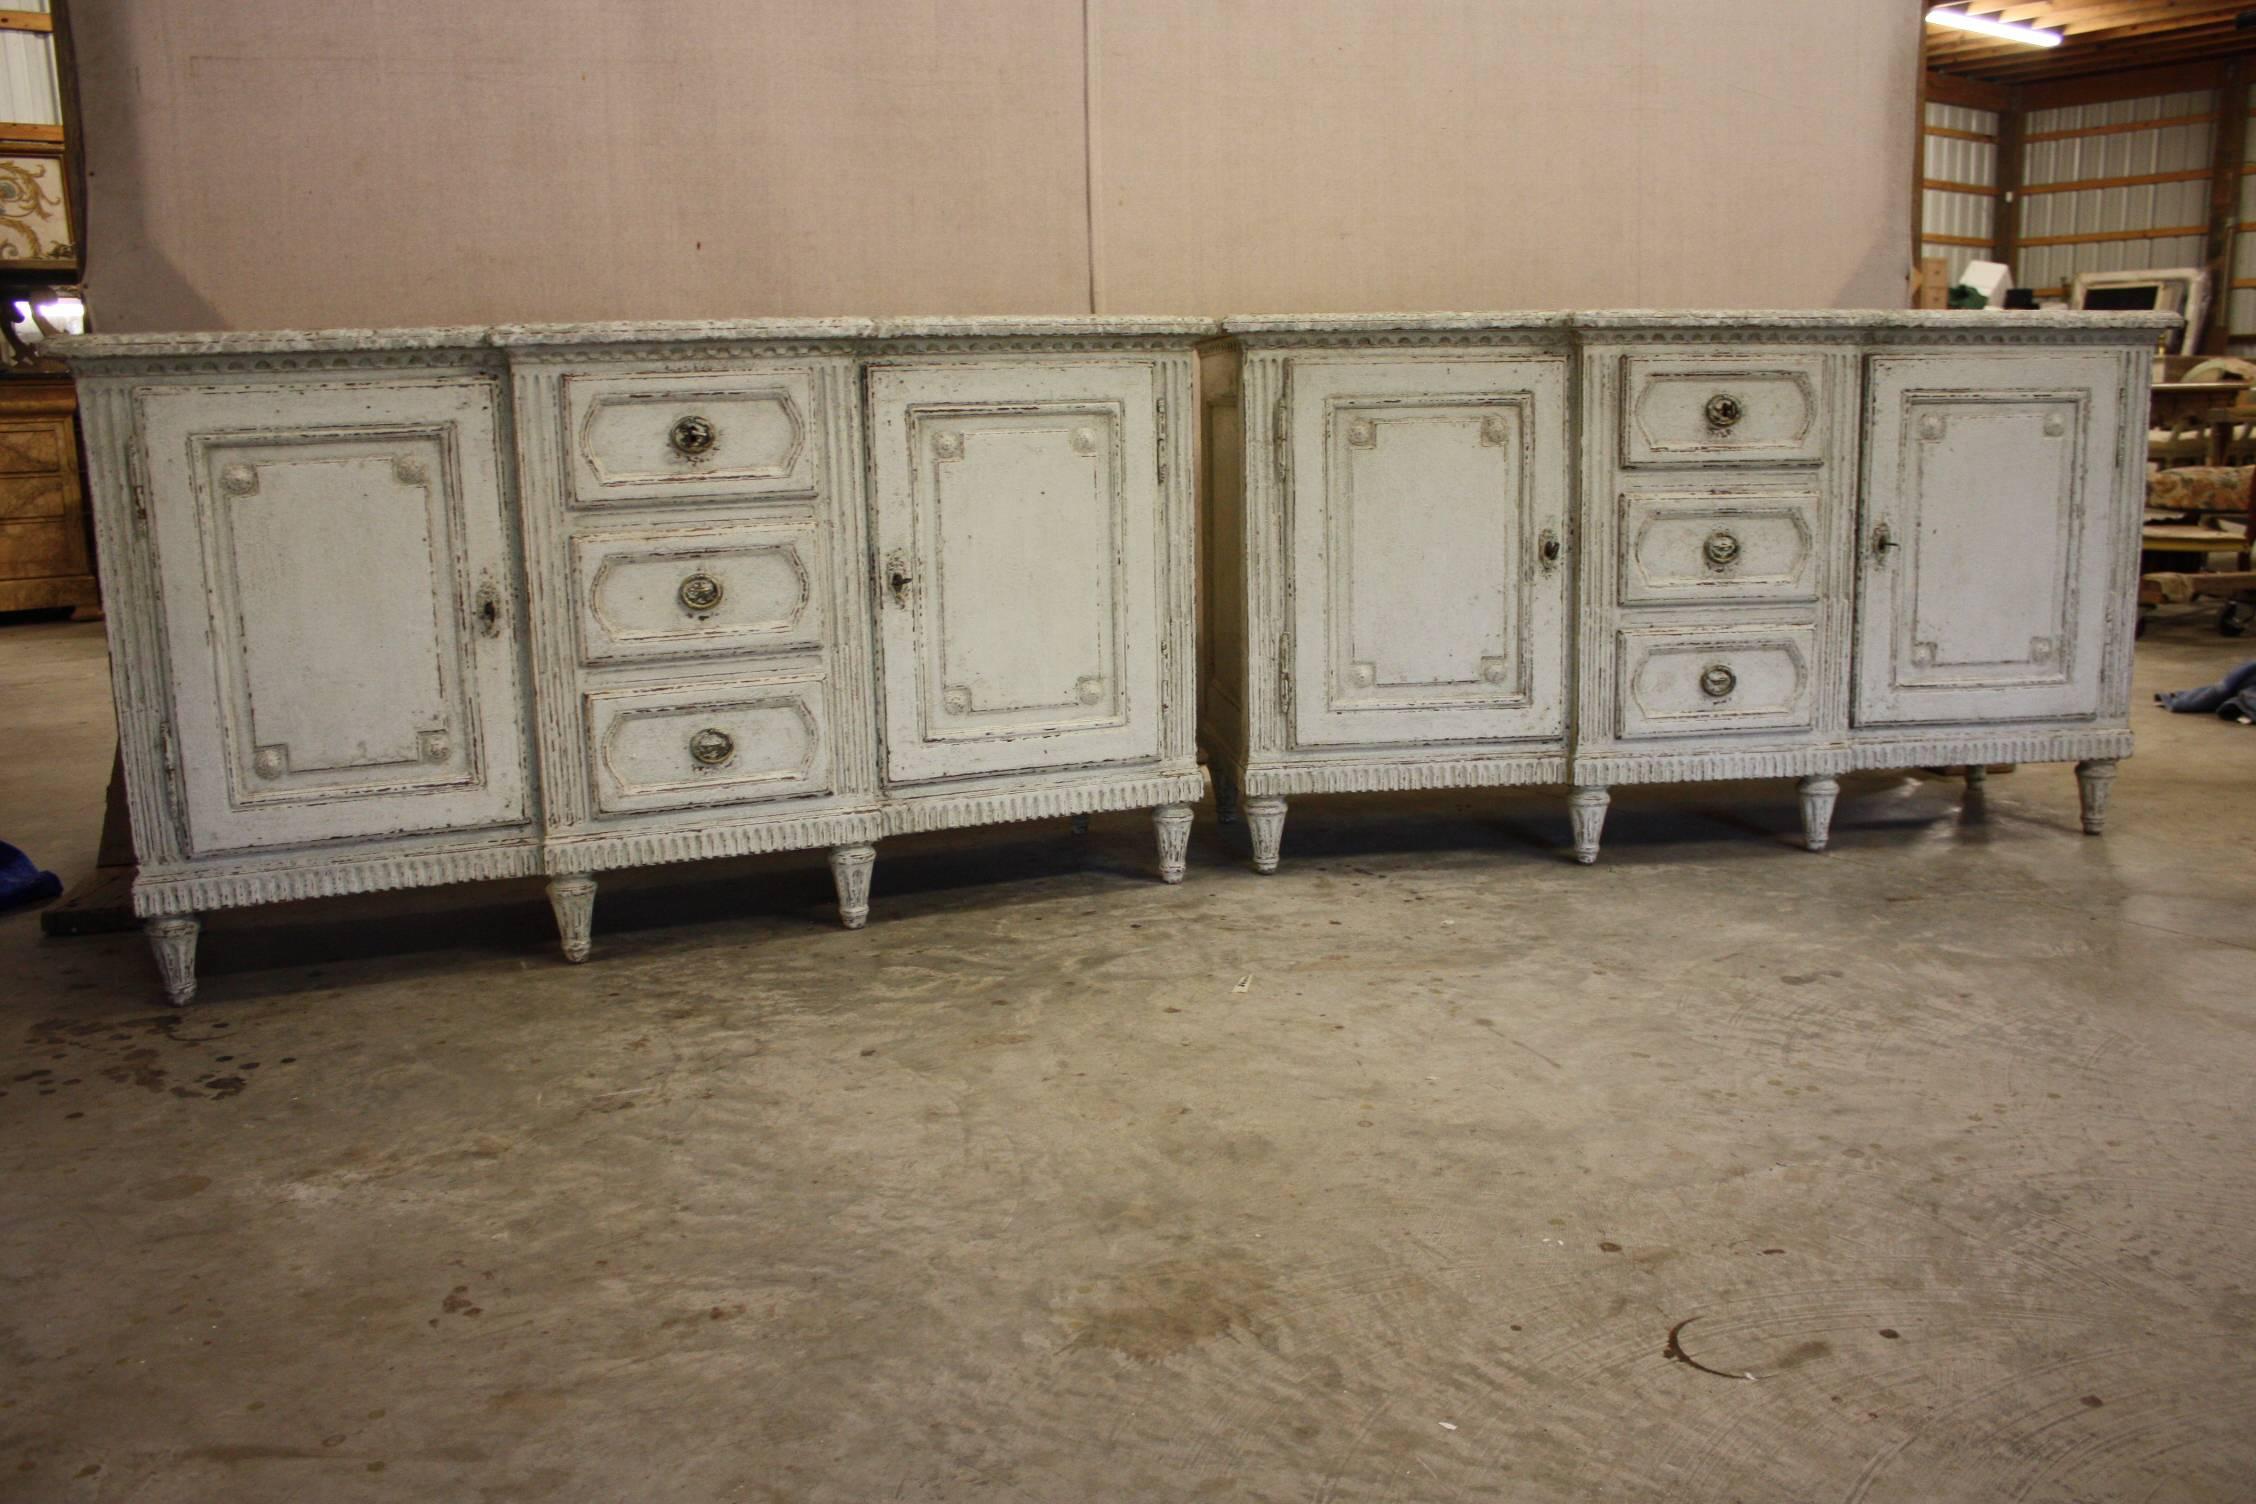 Elegant pair of antique French Louis XVI painted cabinets of drawers featuring Fine carved wood details and a faux marble top. These can be bought as a pair or sold separately.